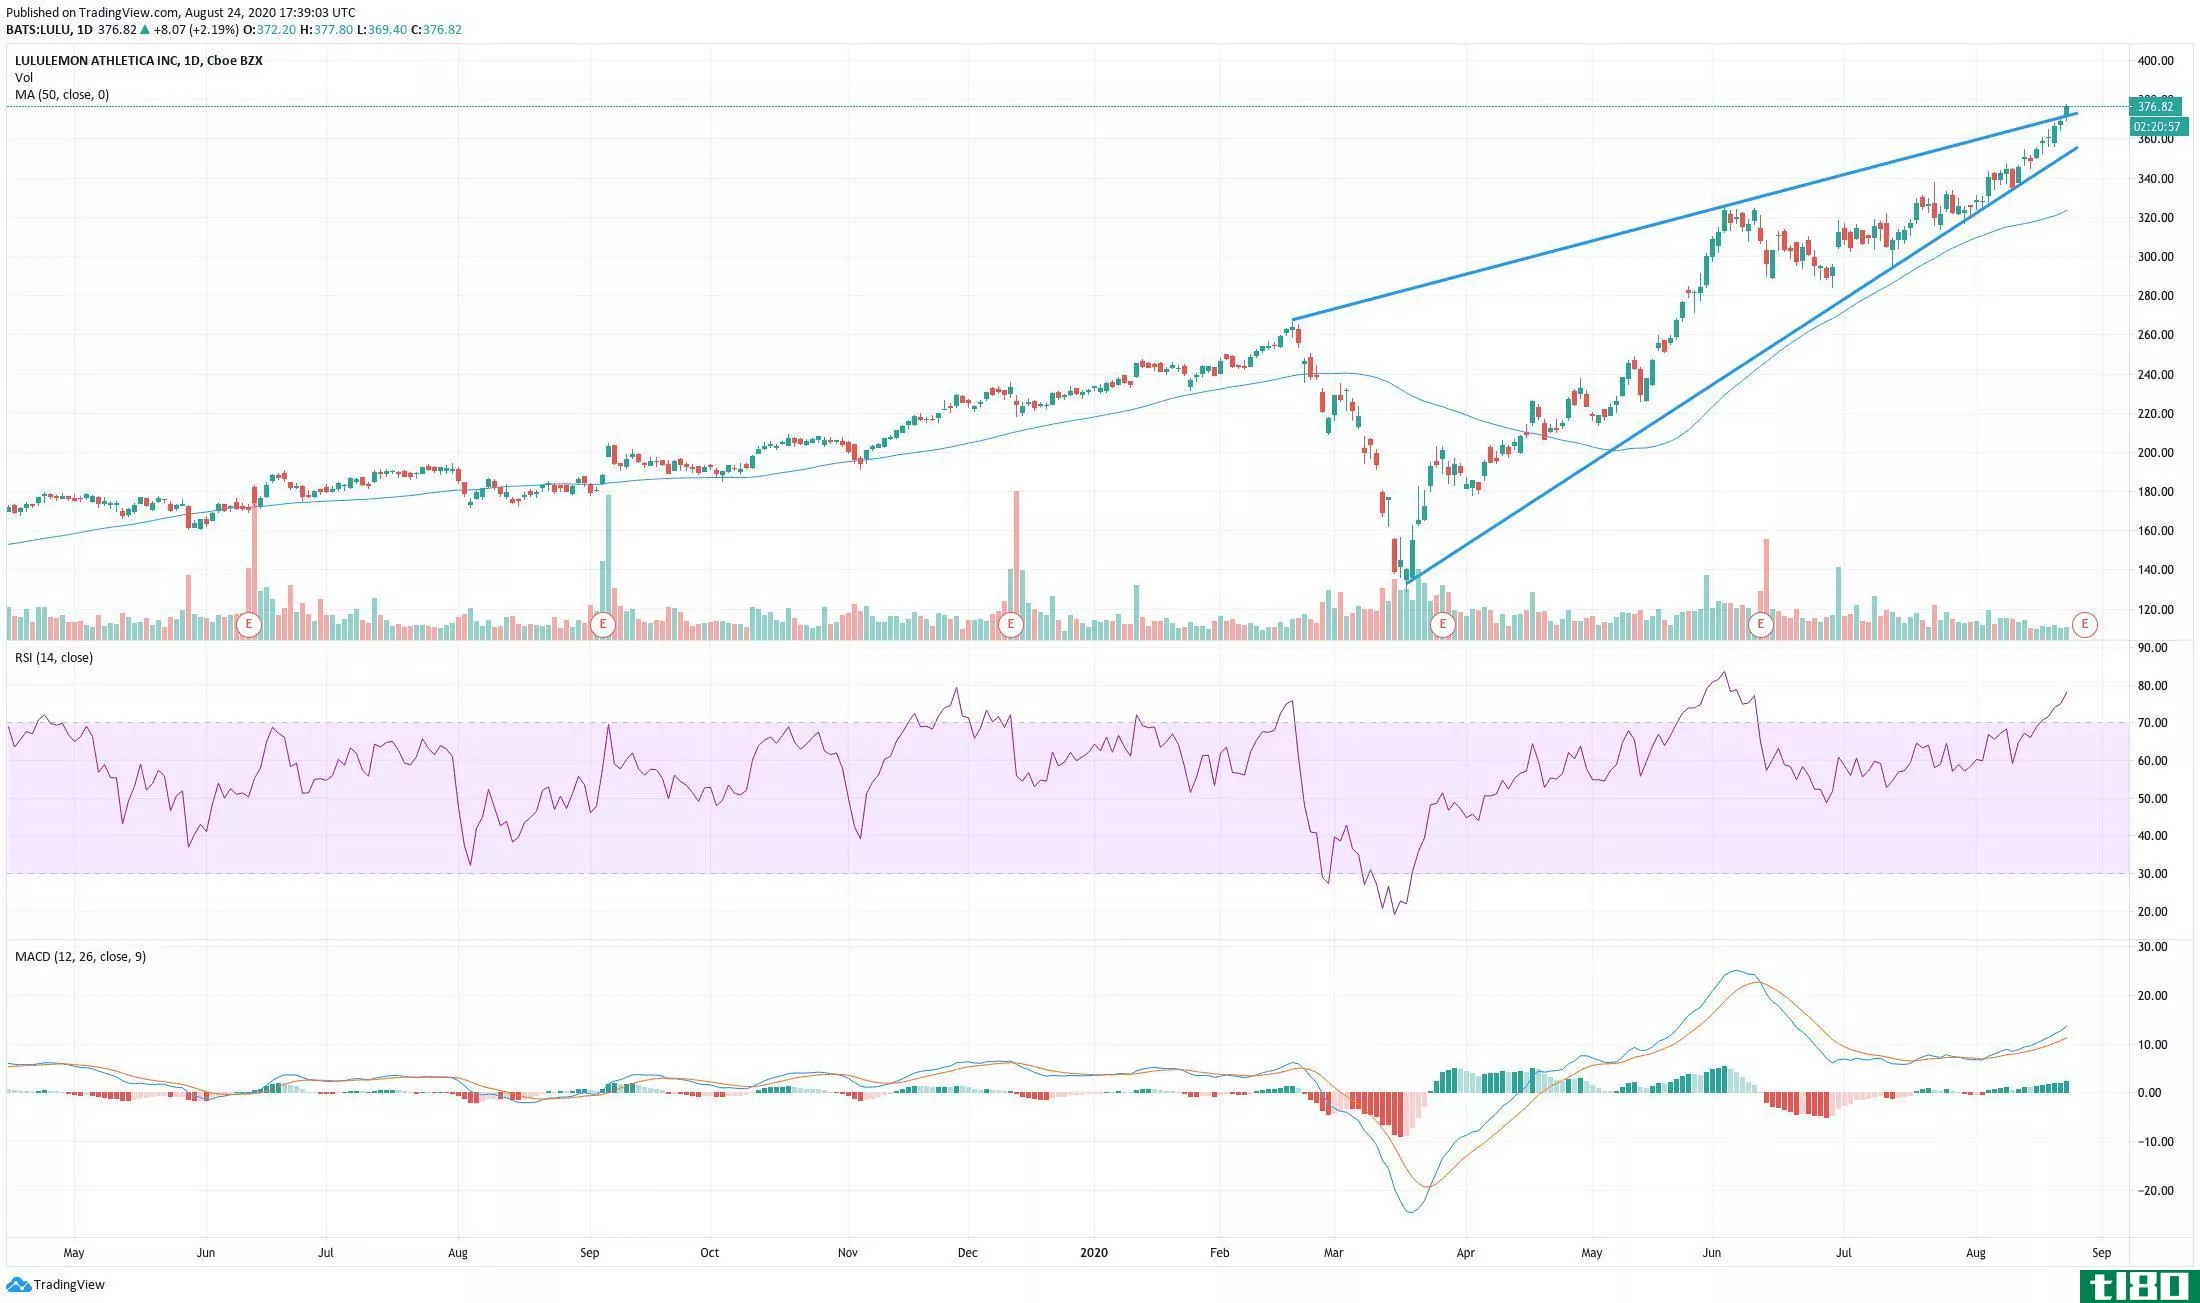 Chart showing the share price performance of Lululemon Athletica Inc. (LULU)